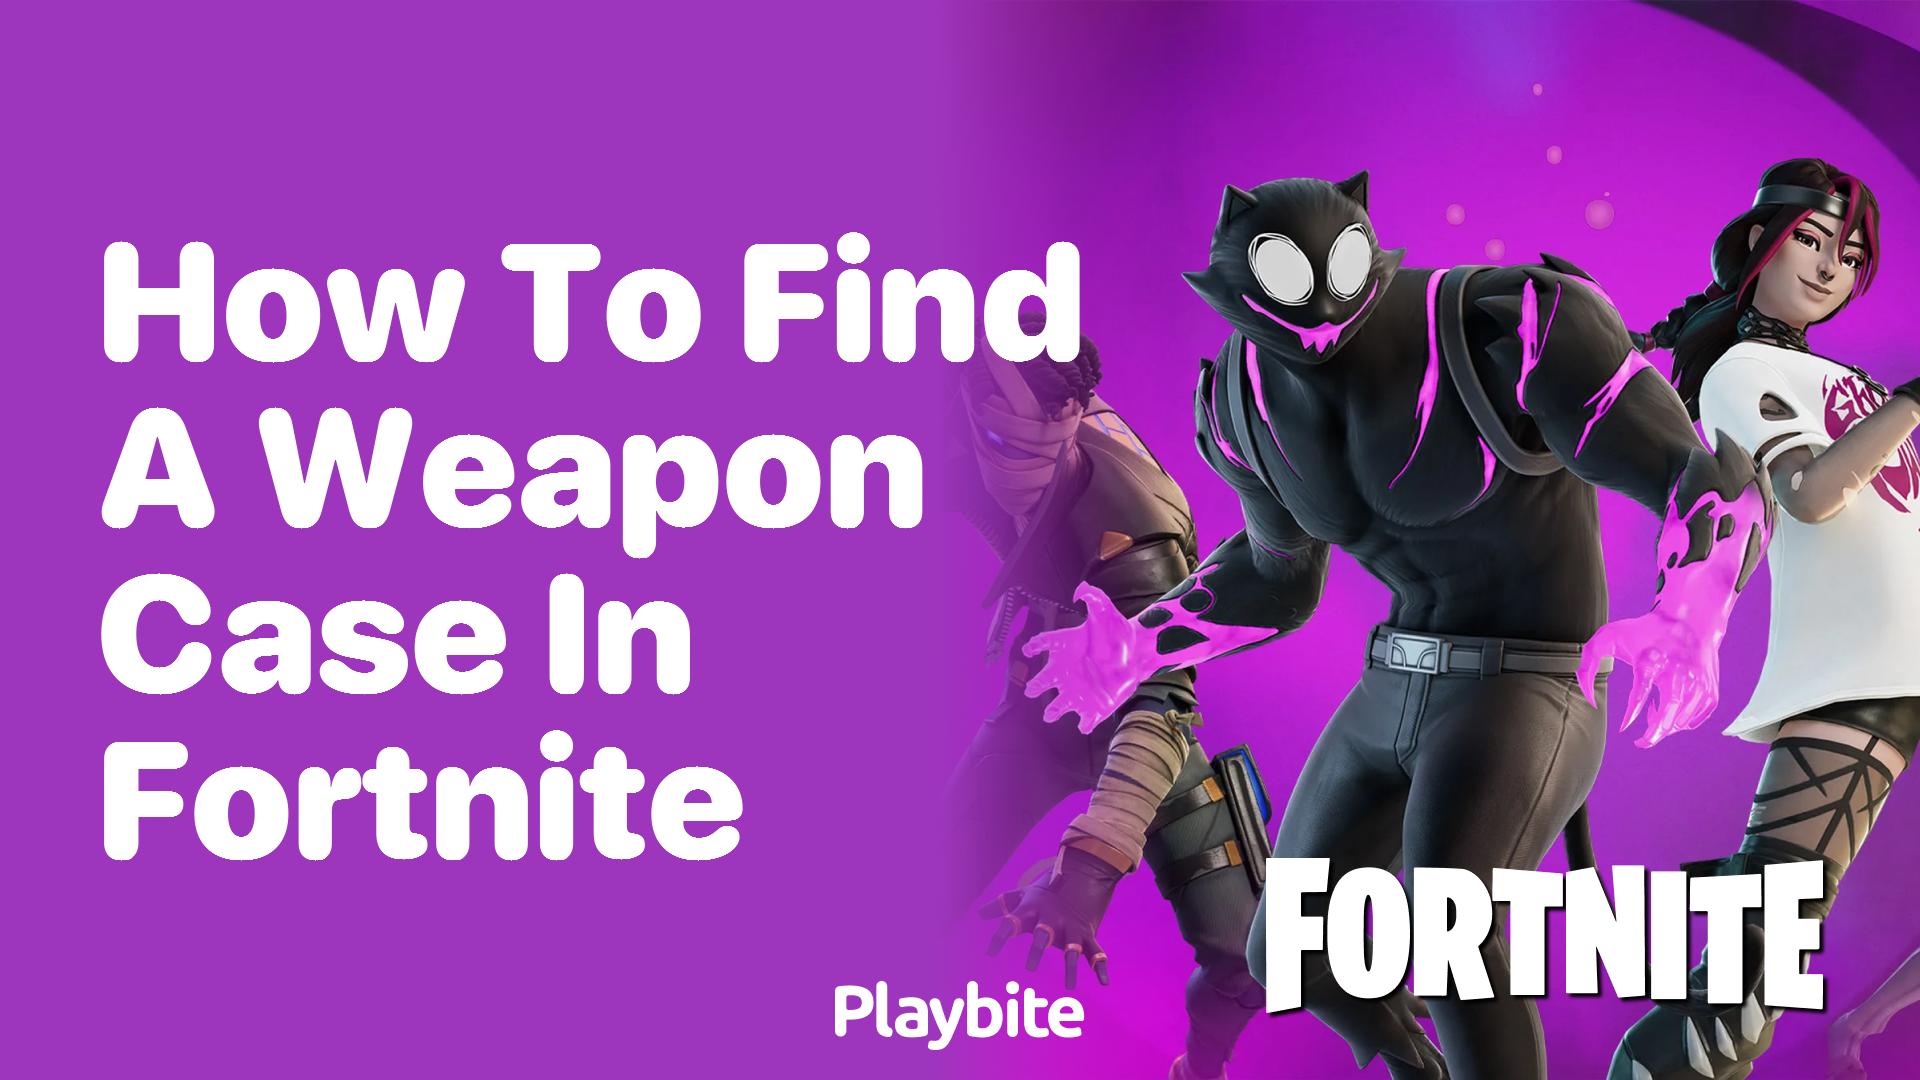 How to Find a Weapon Case in Fortnite